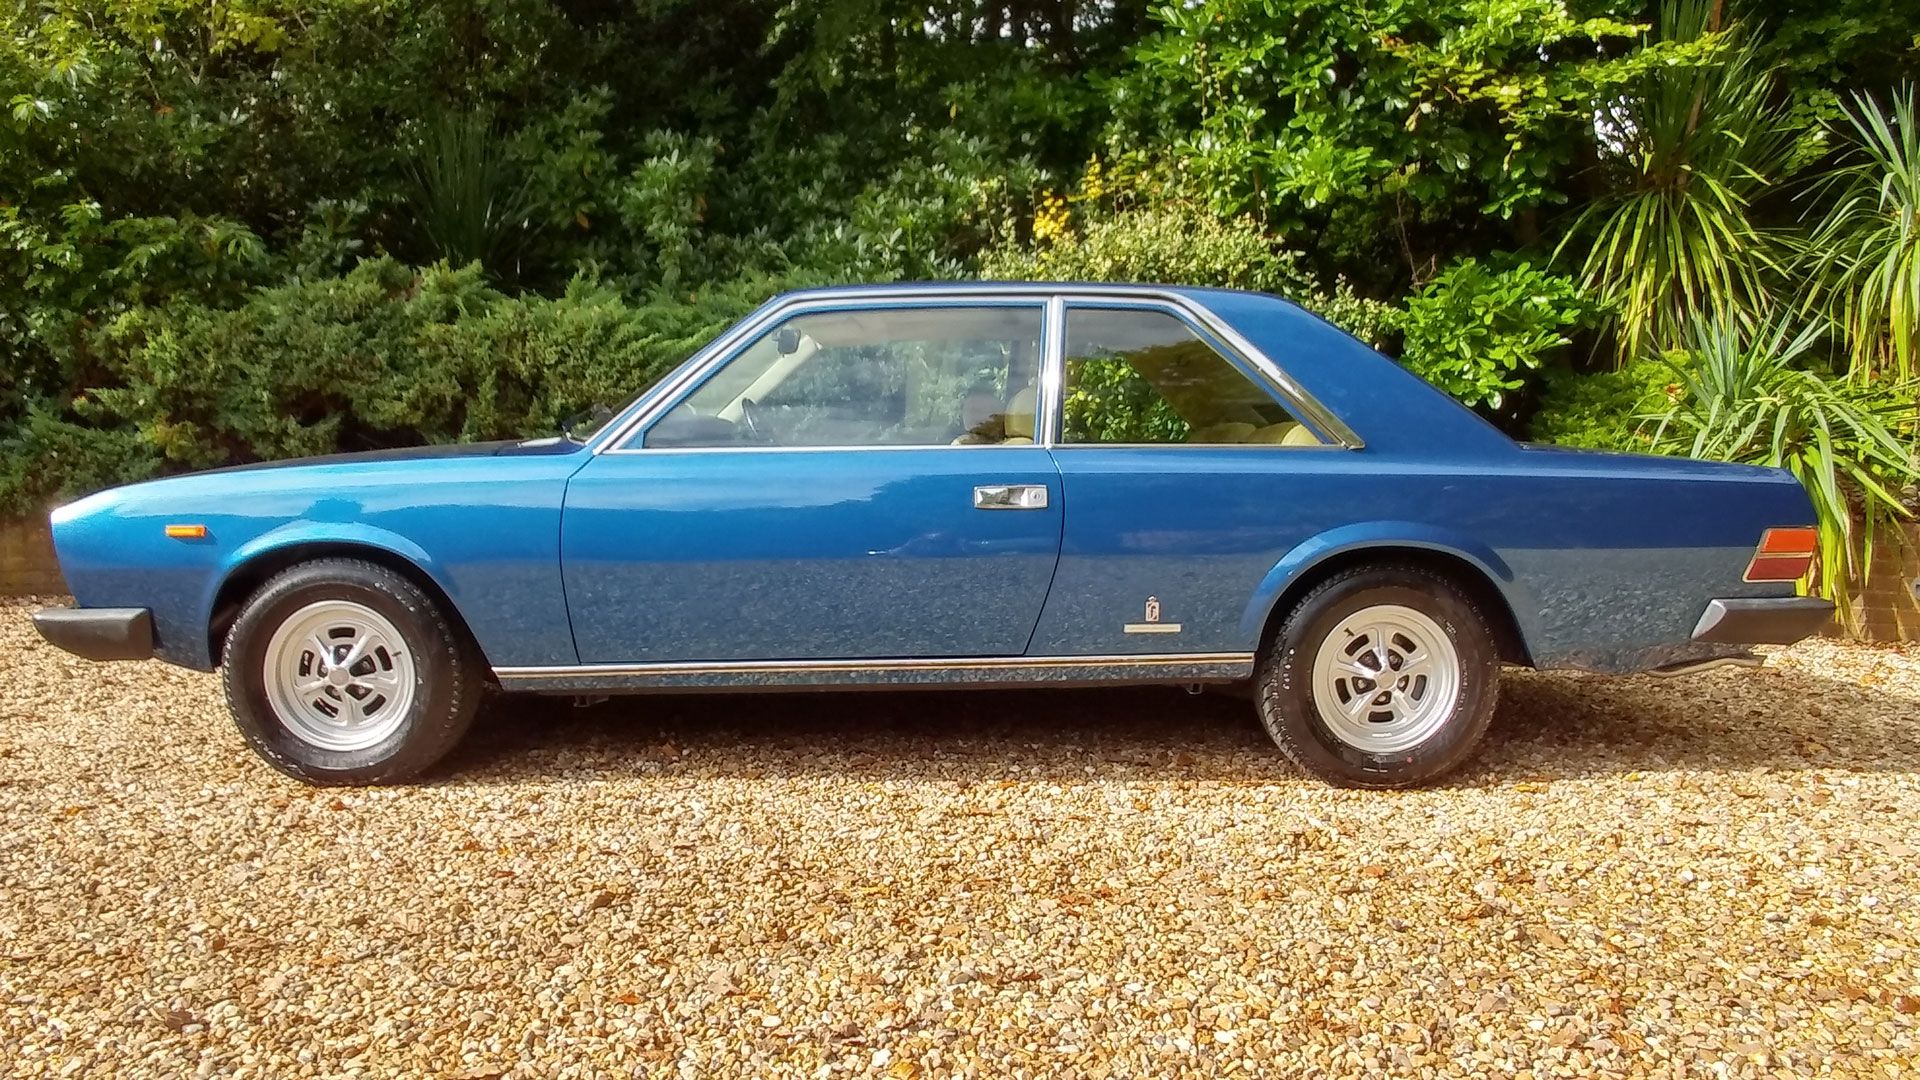 1977 Fiat 130 coupe for sale in London 24,995 GPB LCA